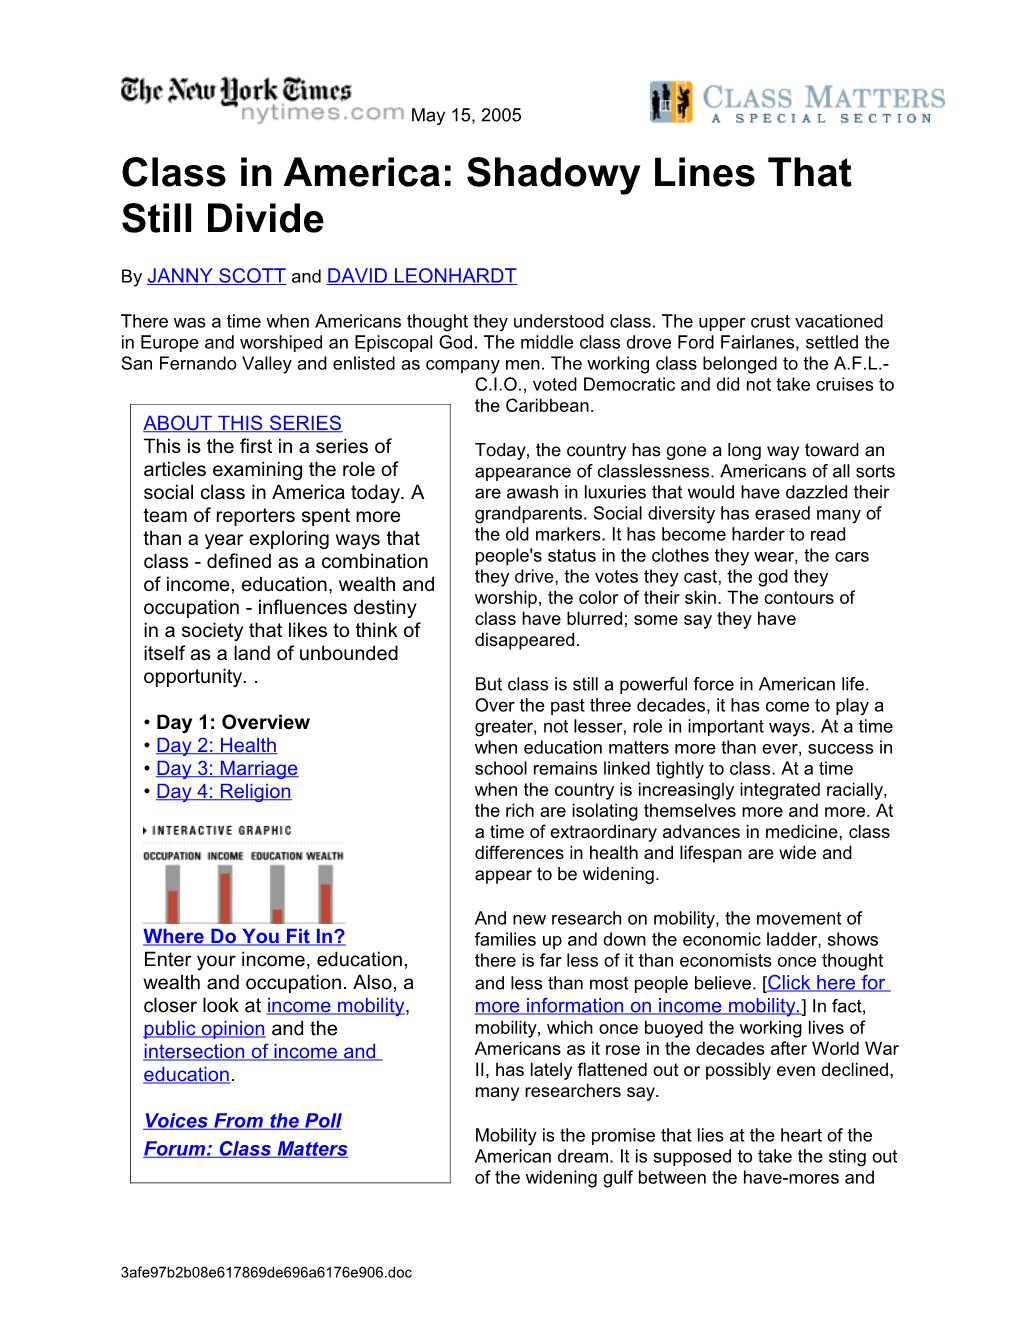 Class in America: Shadowy Lines That Still Divide